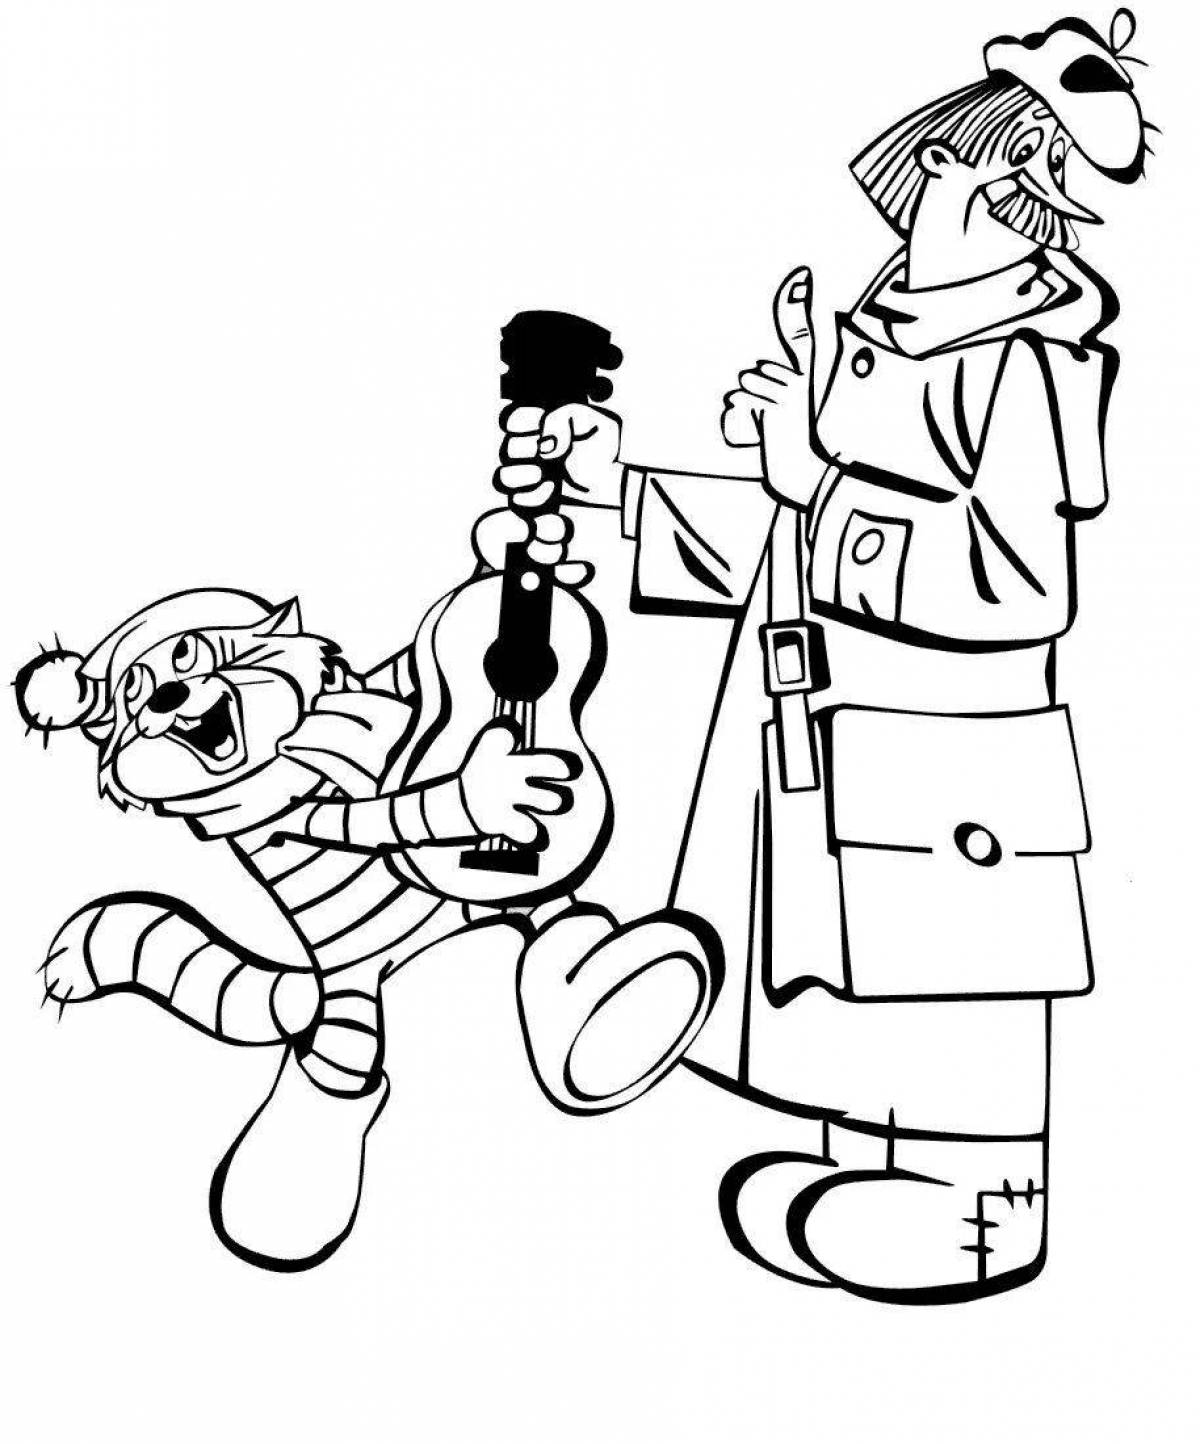 Charming Pechkin postman coloring pages for kids